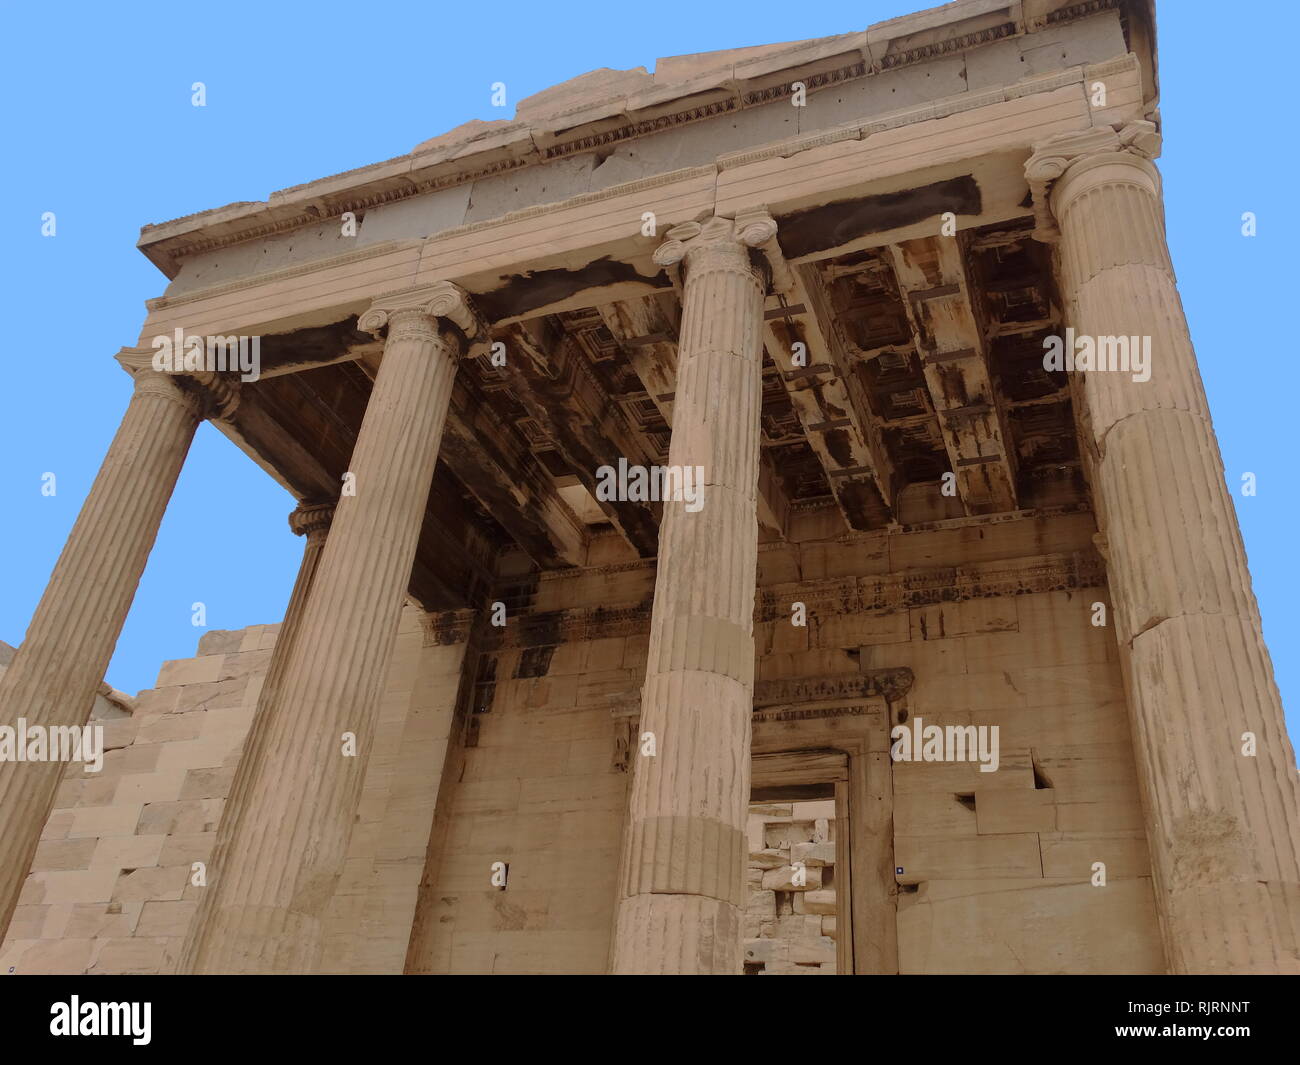 The Erechtheion; an ancient Greek temple on the Acropolis of Athens, Greece, was dedicated to both Athena and Poseidon. The temple as seen today was built between 421 and 406 BC. Its architect may have been Mnesicles, and it derived its name from a shrine dedicated to the legendary Greek hero Erichthonius. Stock Photo